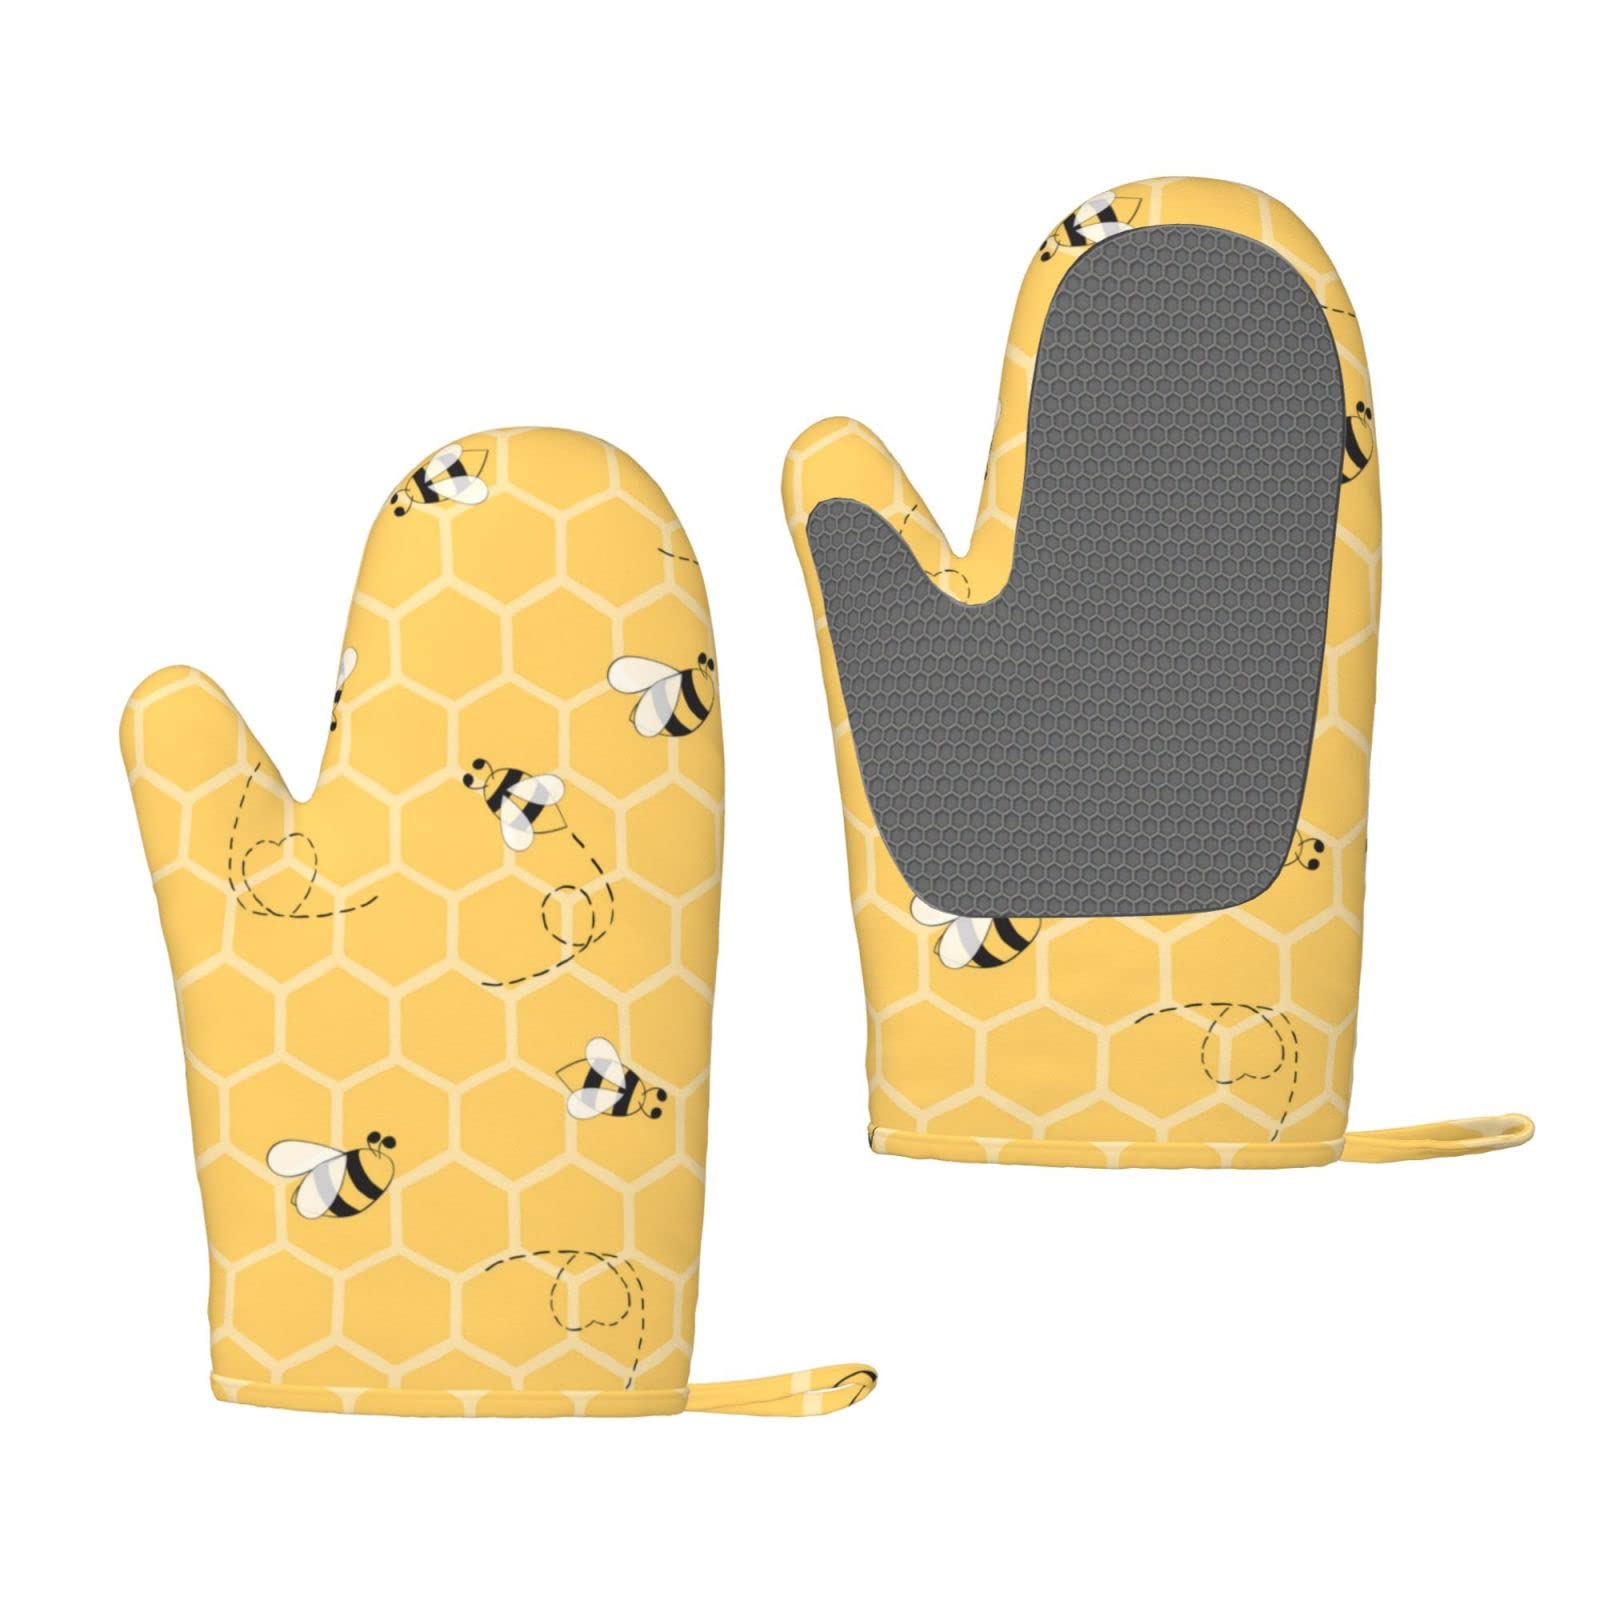 1 Pair Durable Funny Honey Bees Kitchen Silicone Oven Mitts, Yellow Beehive Heat Resistant Lining Fabric Pot Holder Gloves for BBQ Cooking Baking